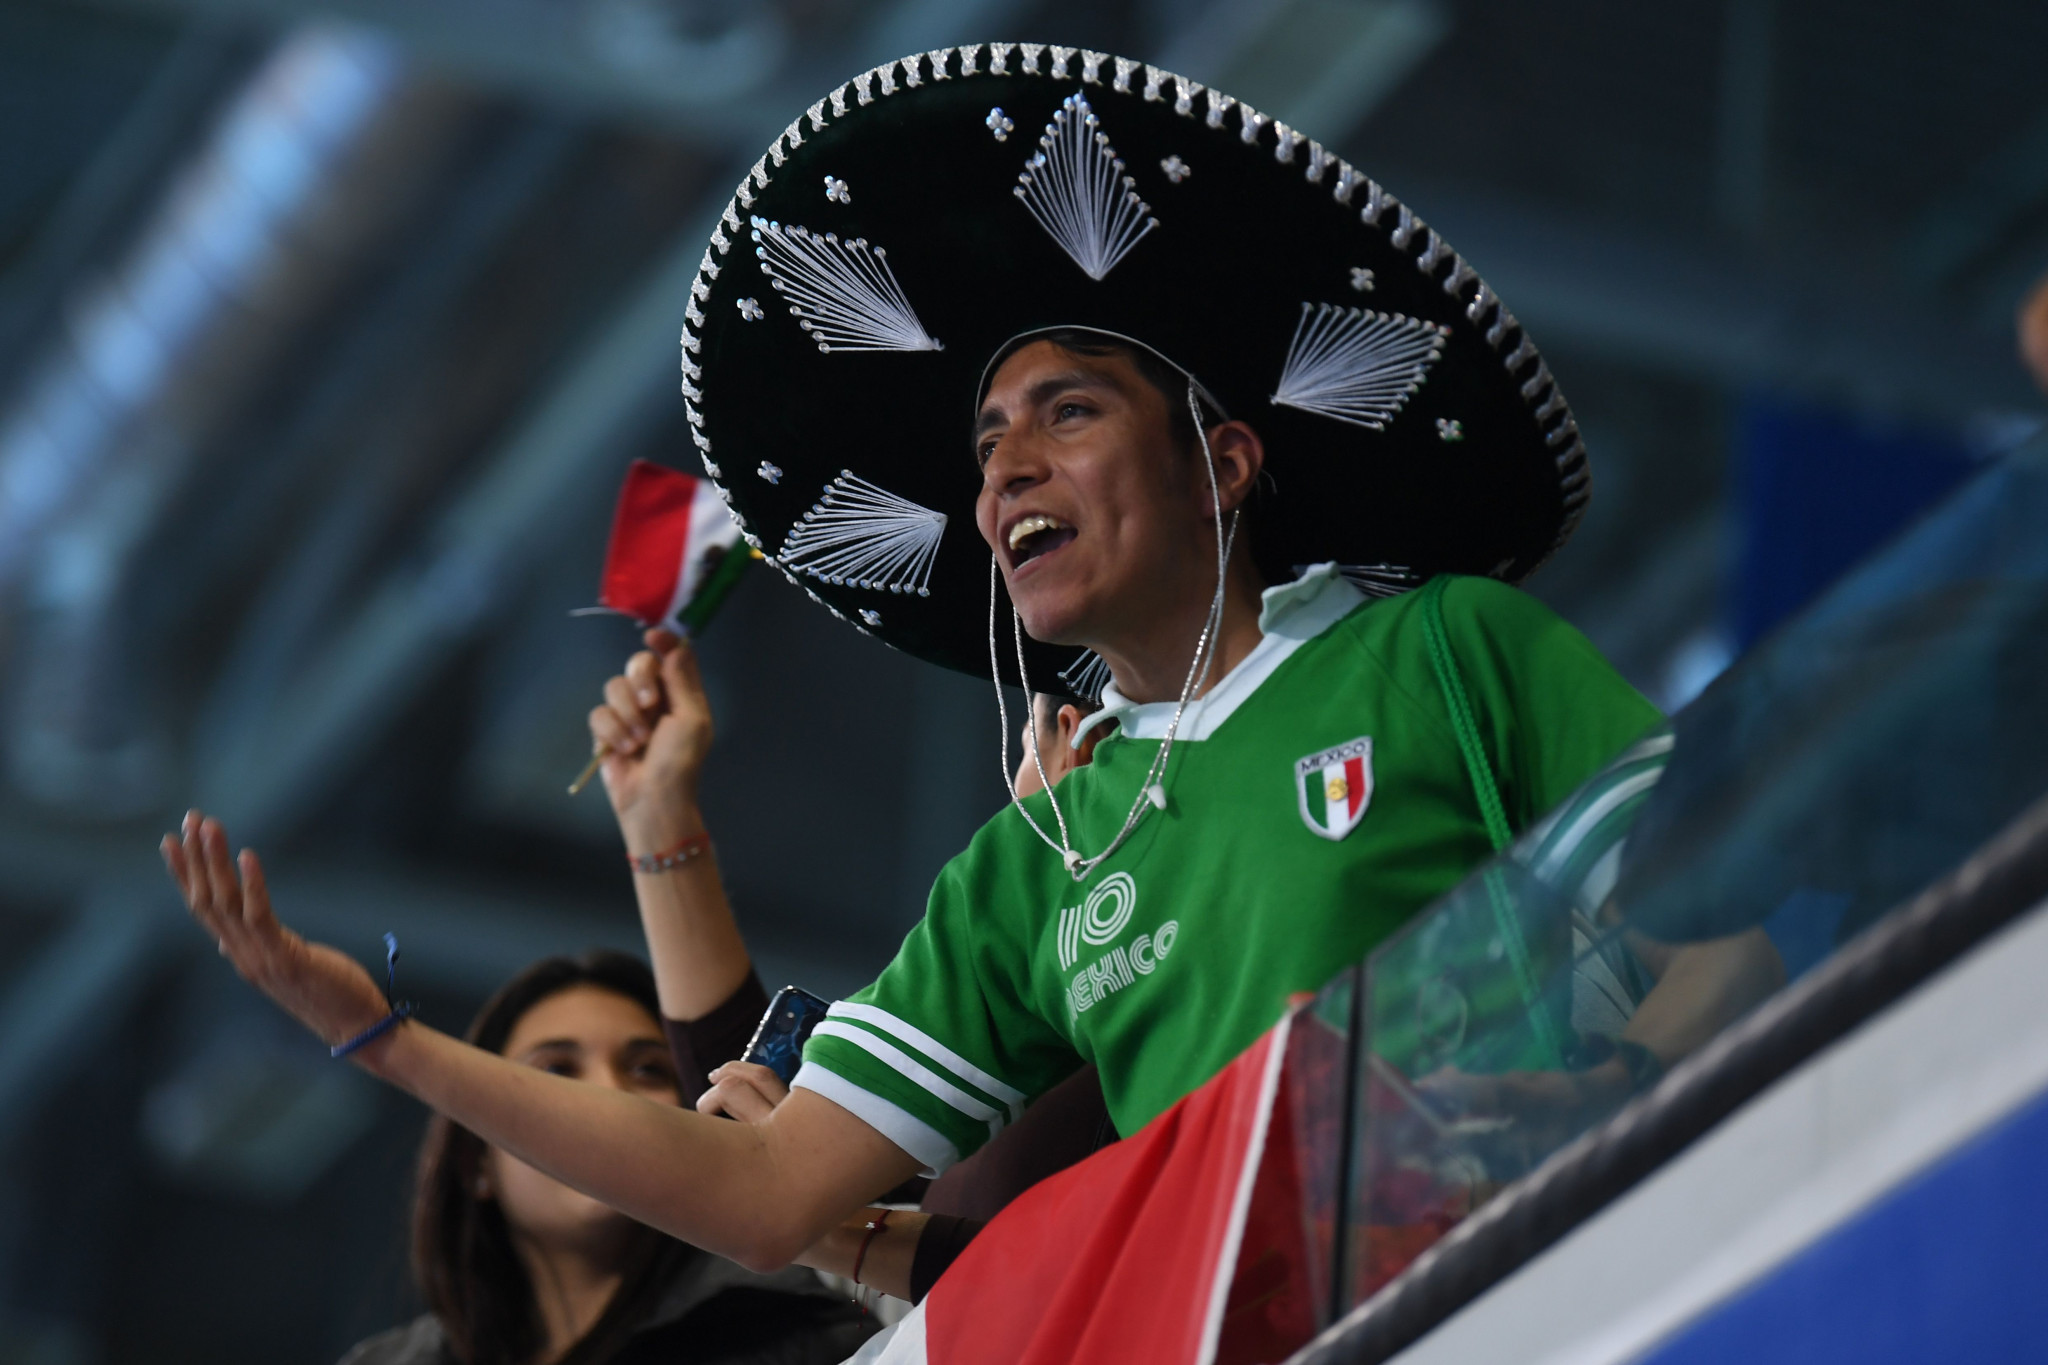 Mexican fans were among those in attendance at the diving ©Getty Images